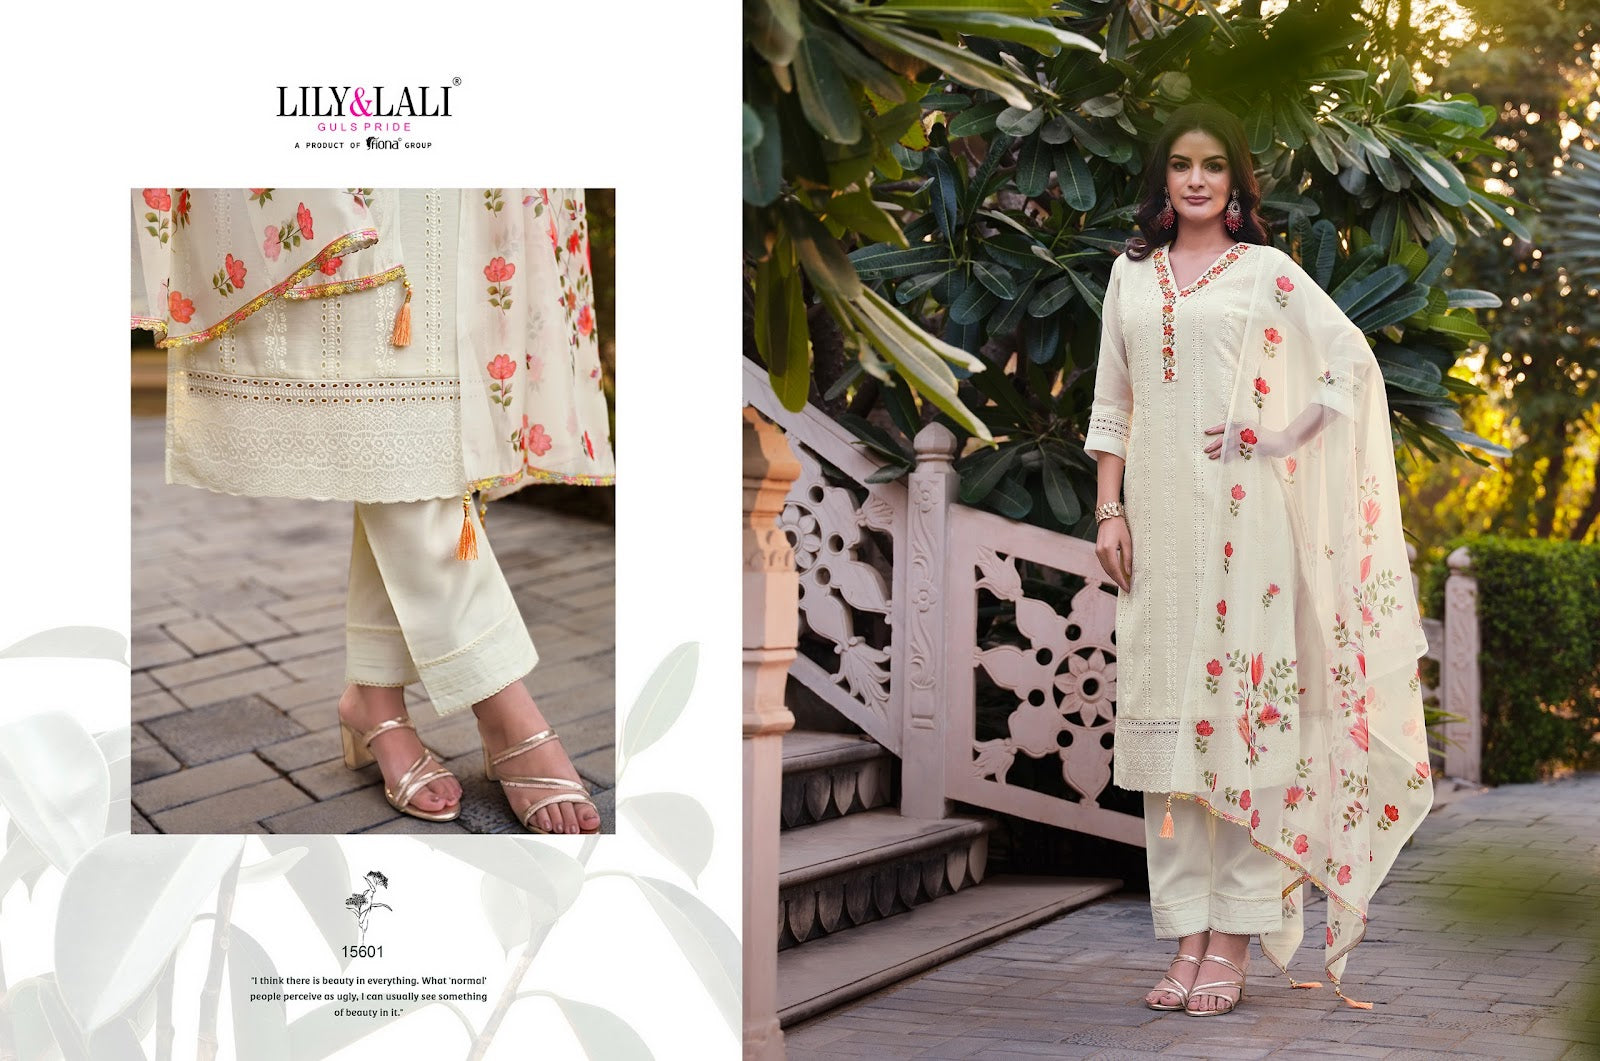 Lucknowi-3 Lily Lali Chanderi Silk Readymade Pant Style Suits